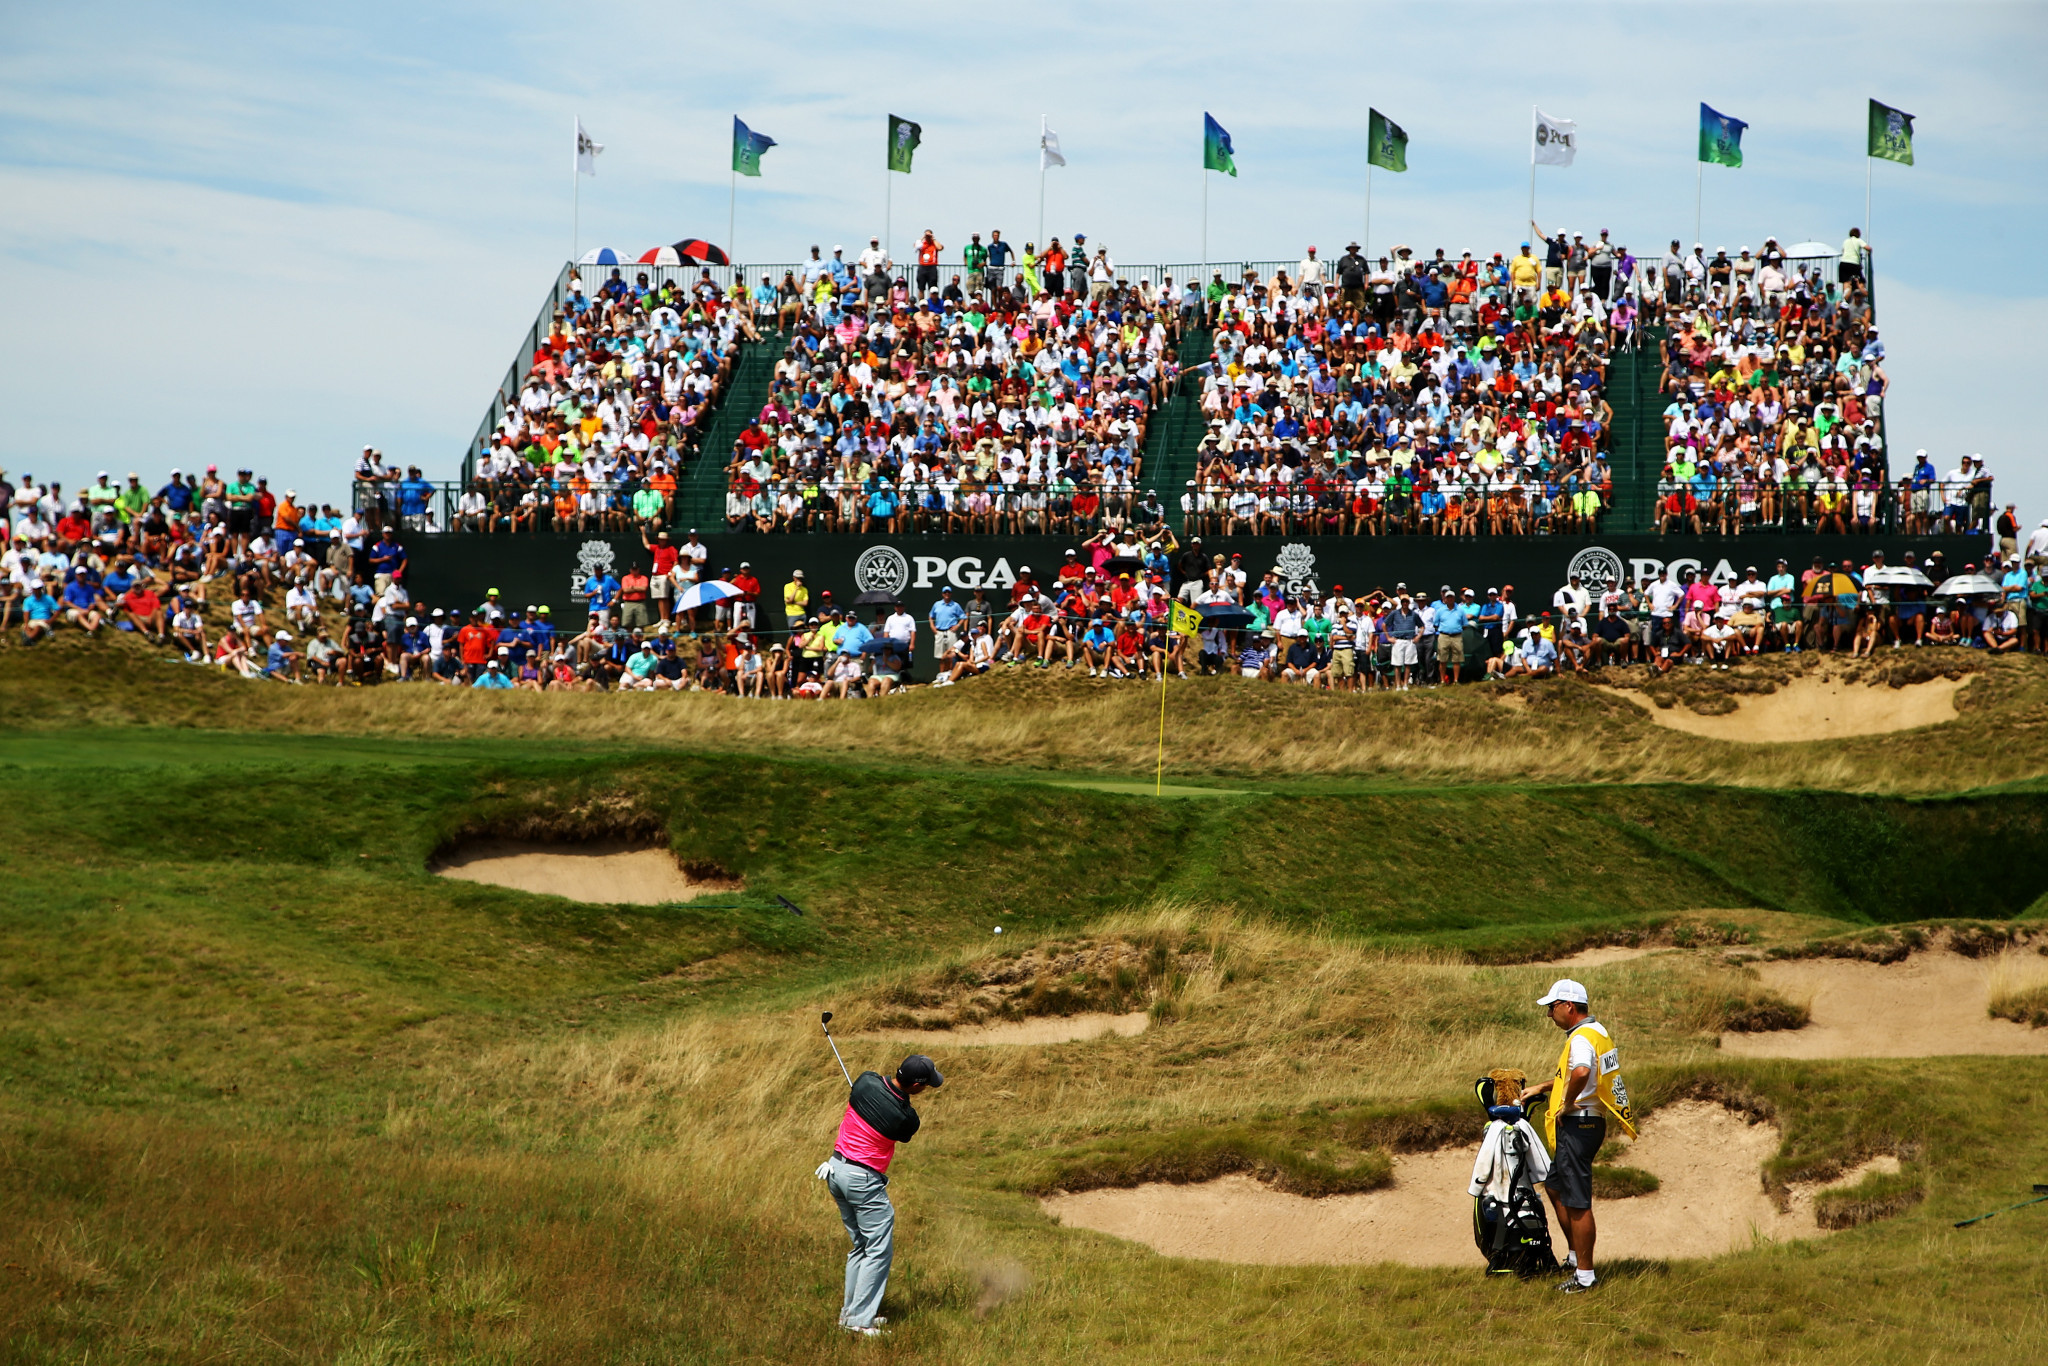 This year's Ryder Cup was due to take place at Whistling Straits in Wisconsin ©Getty Images